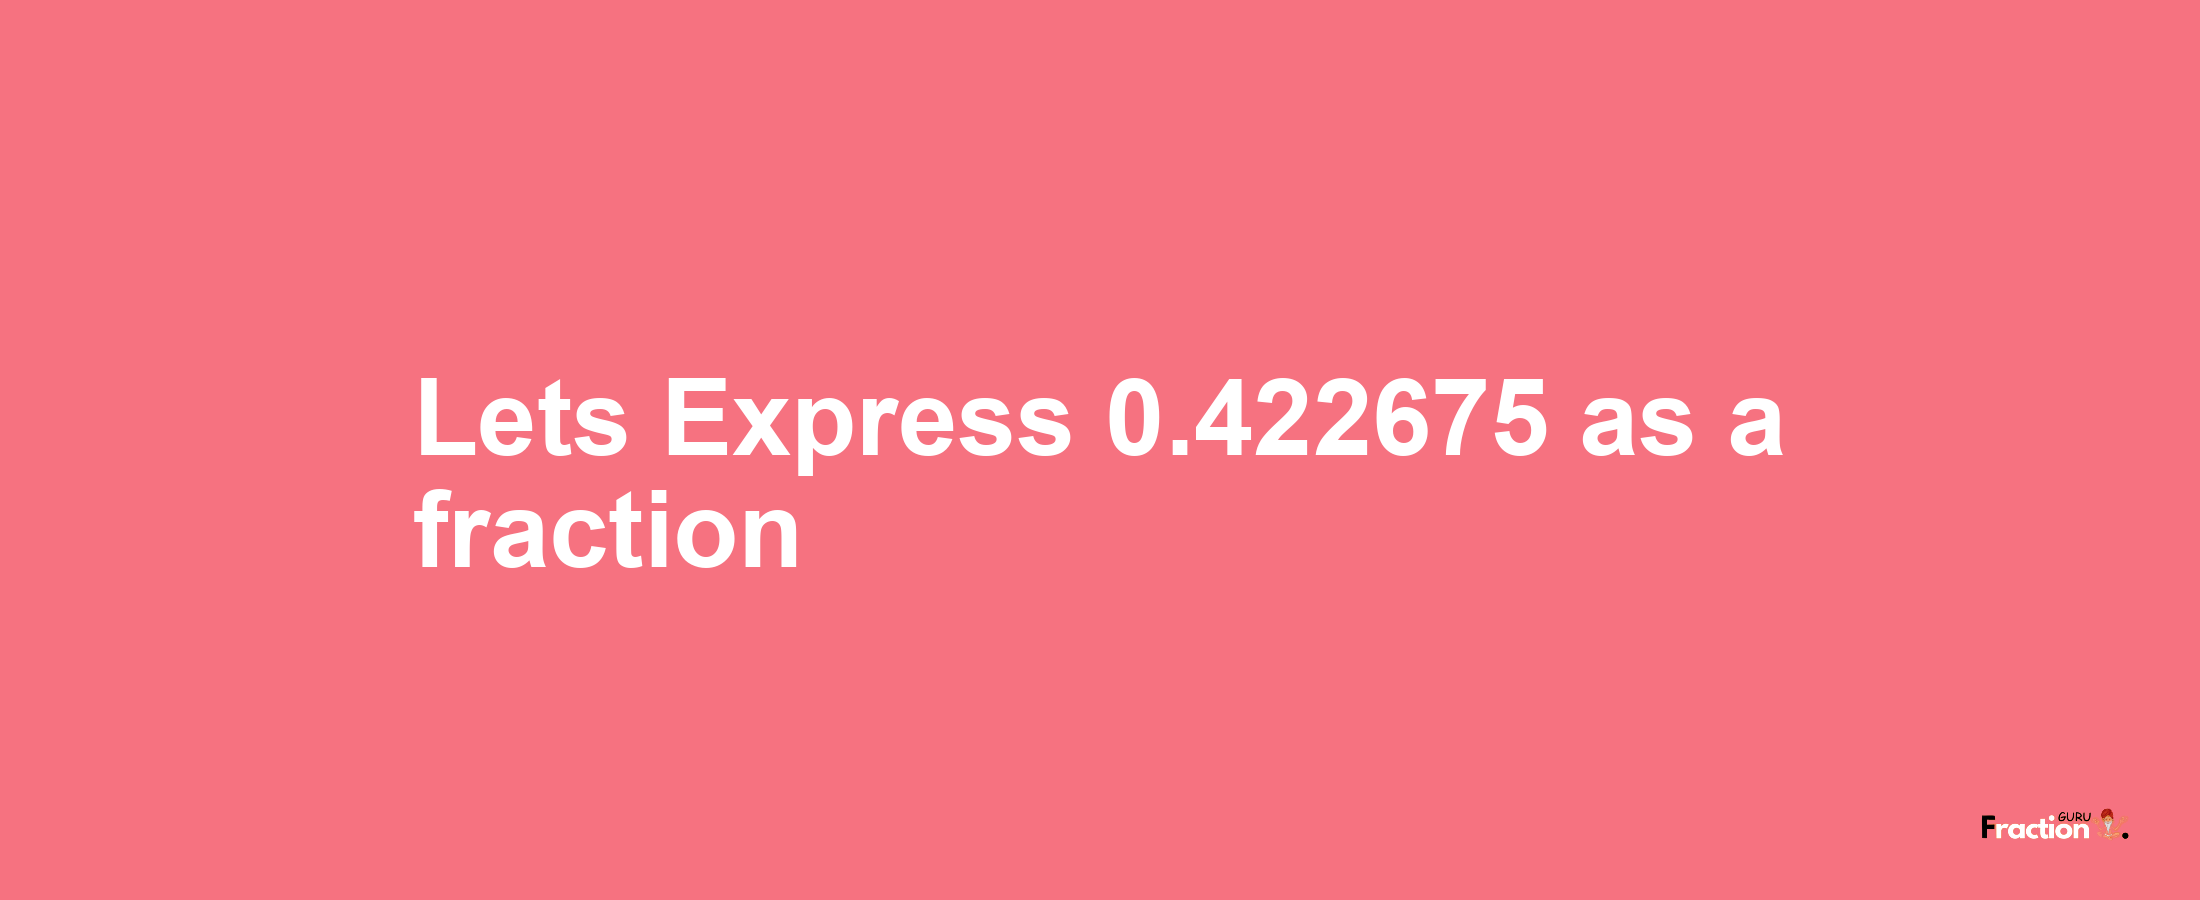 Lets Express 0.422675 as afraction